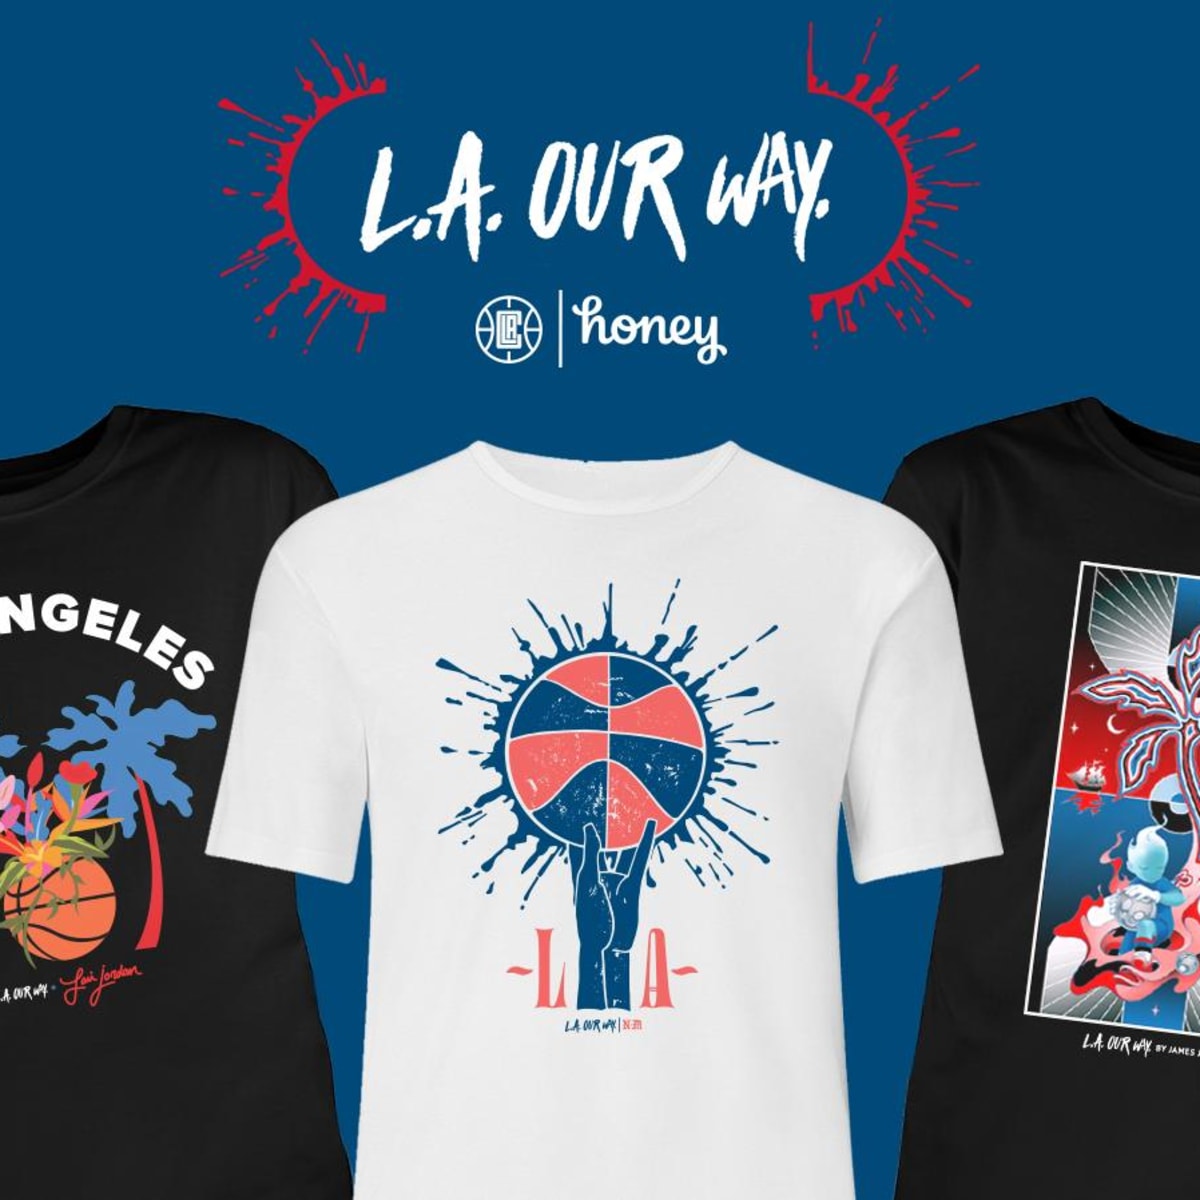 Miami Heat wear shirts inside out to support LA Clippers